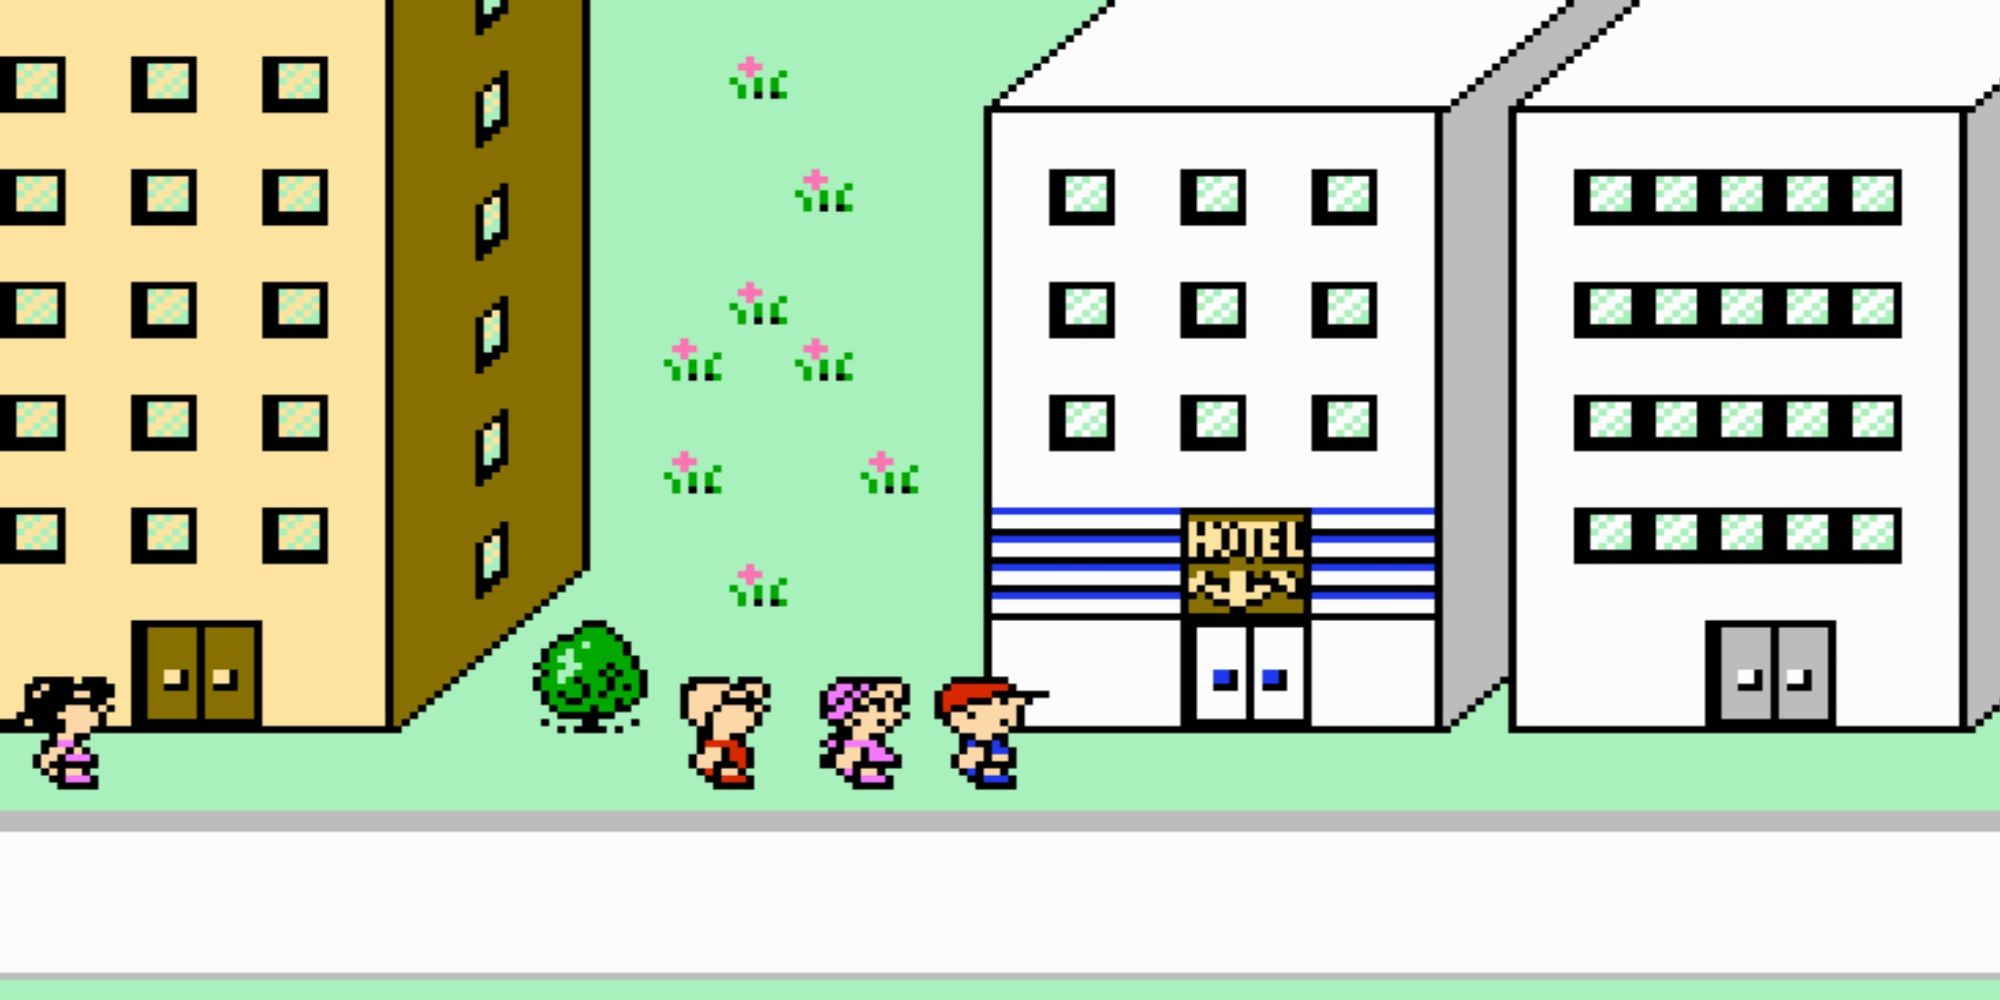 Earthbound Beginnings - Walking down a street next to a hotel.